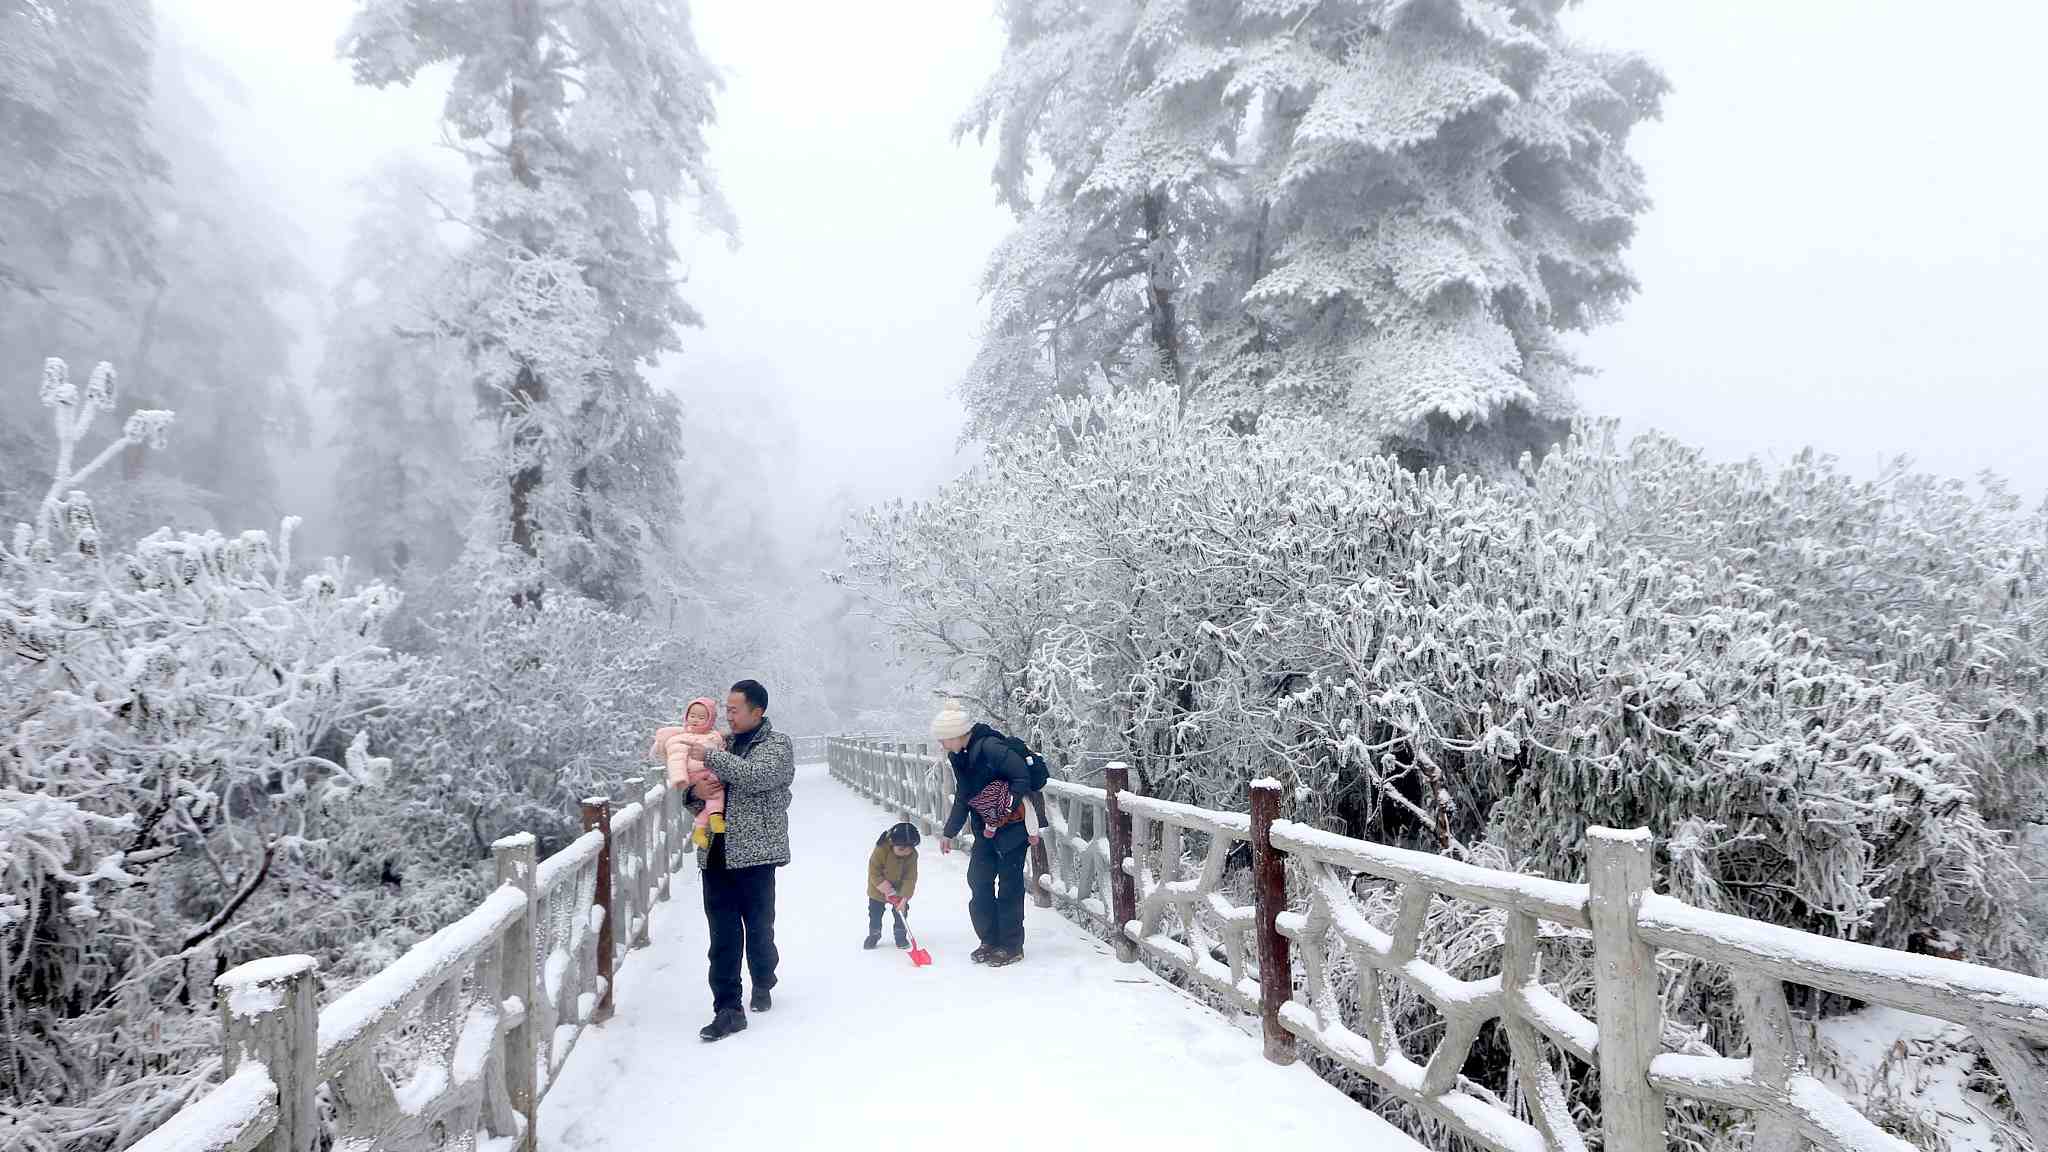 Major Snow makes a cold debut in China CGTN